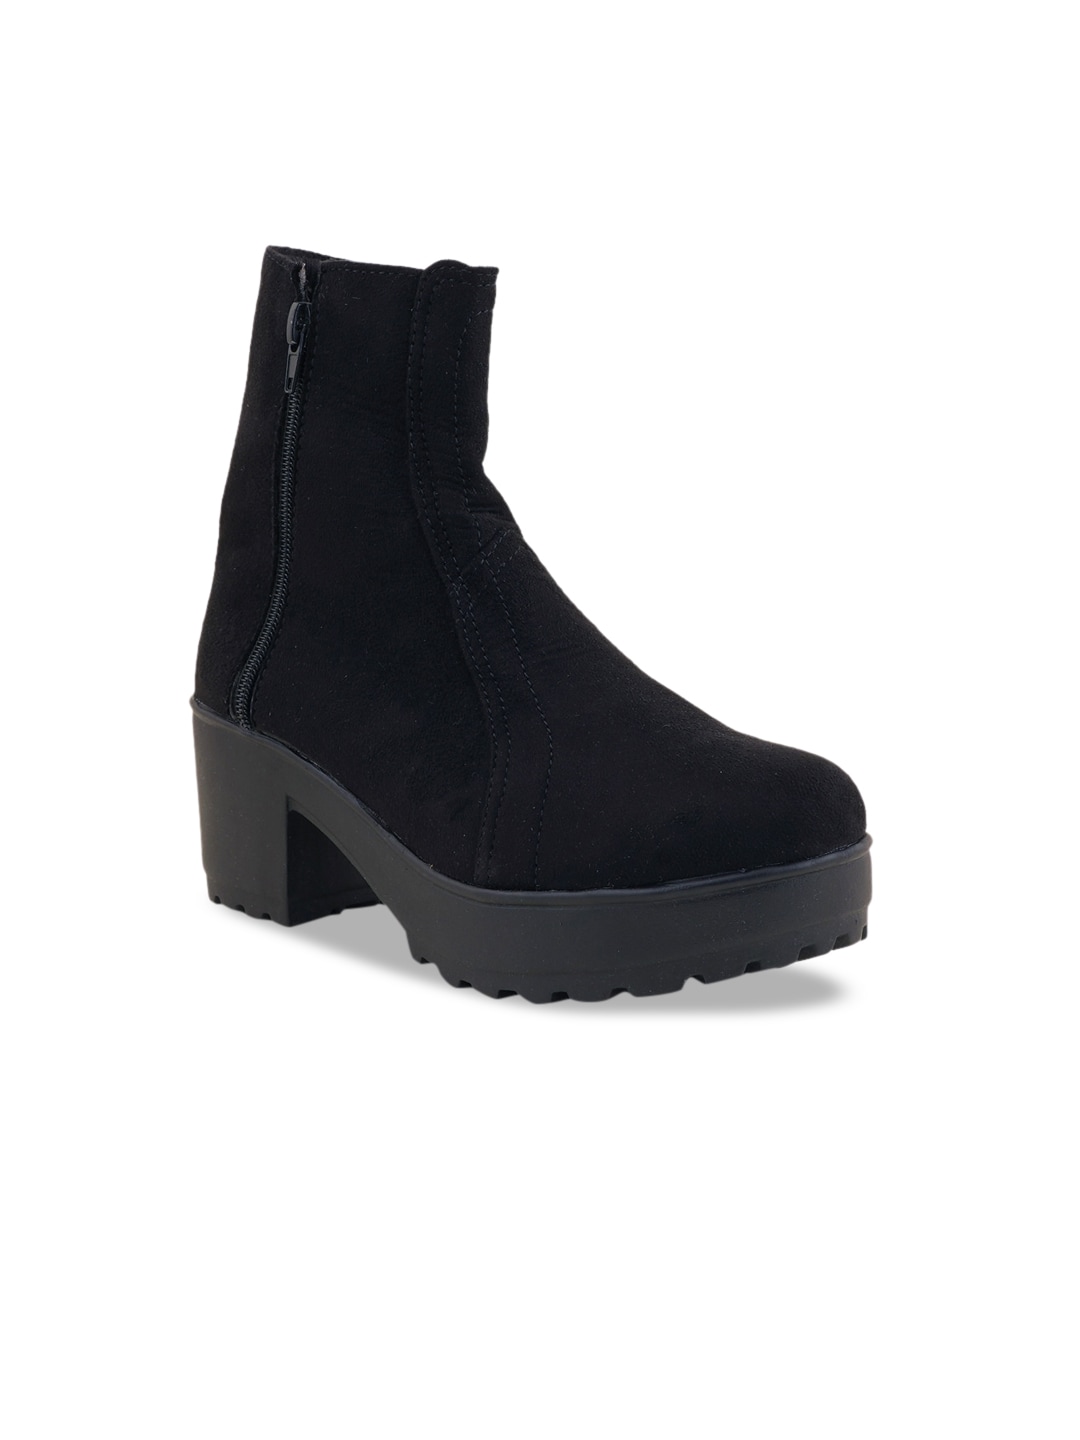 Walkfree Women Black Solid Mid Top Flat Boots Price in India